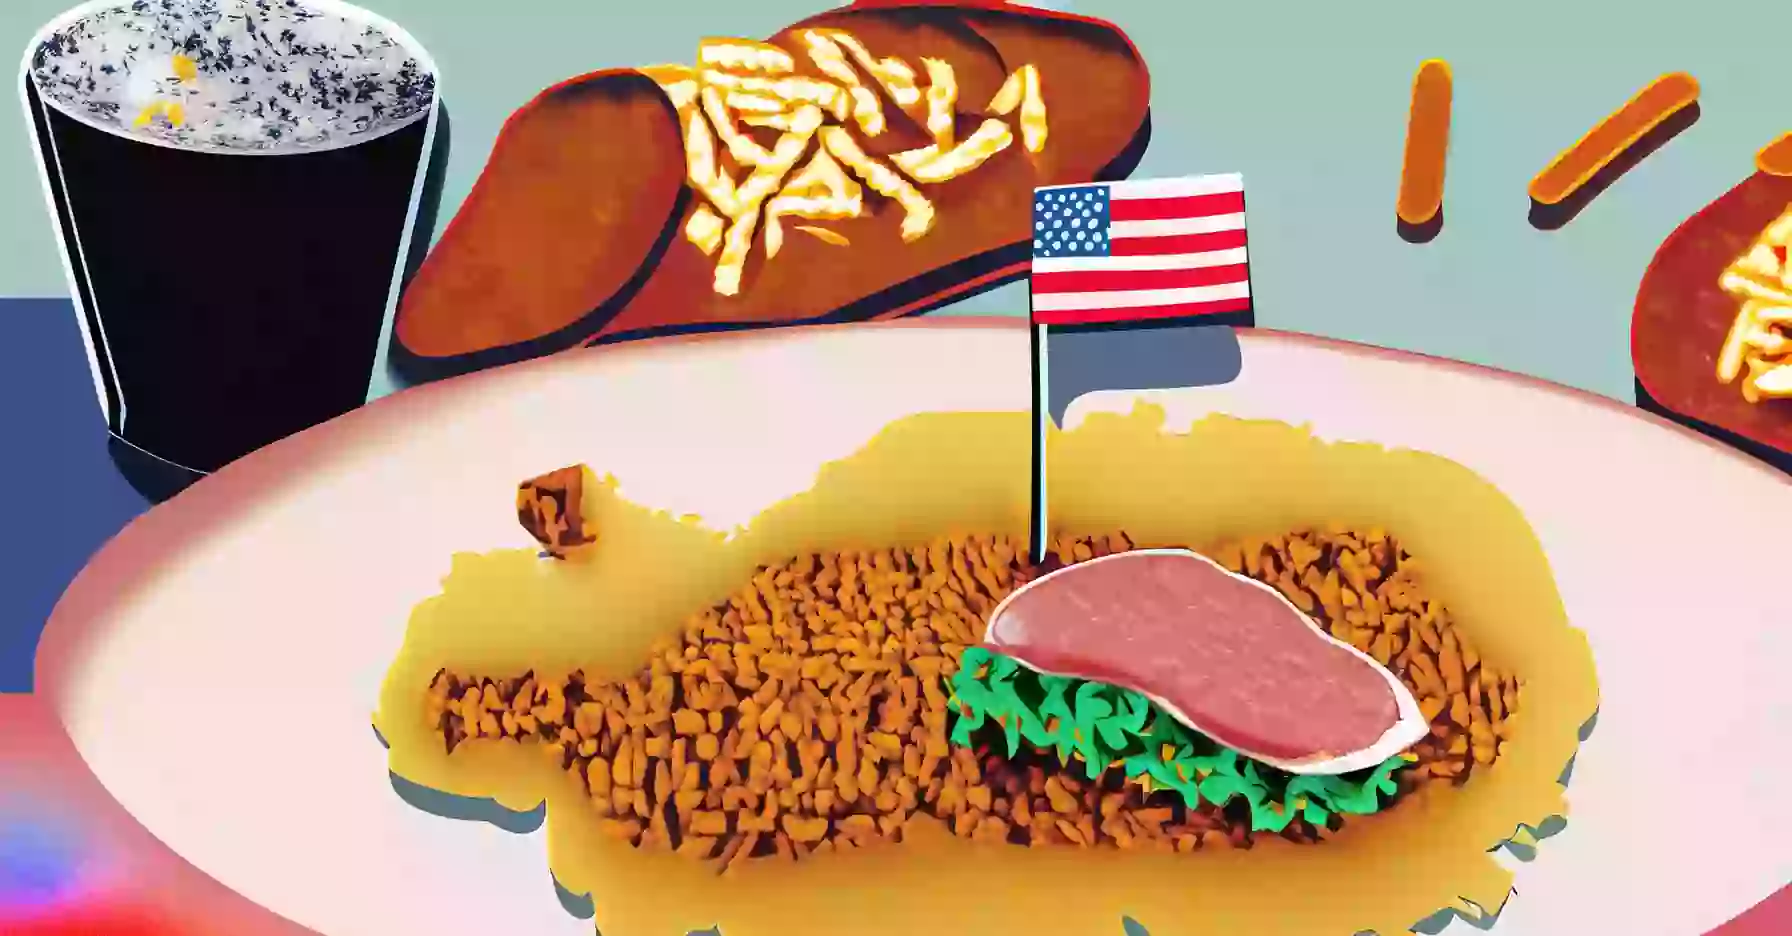 What Food is the USA known For?